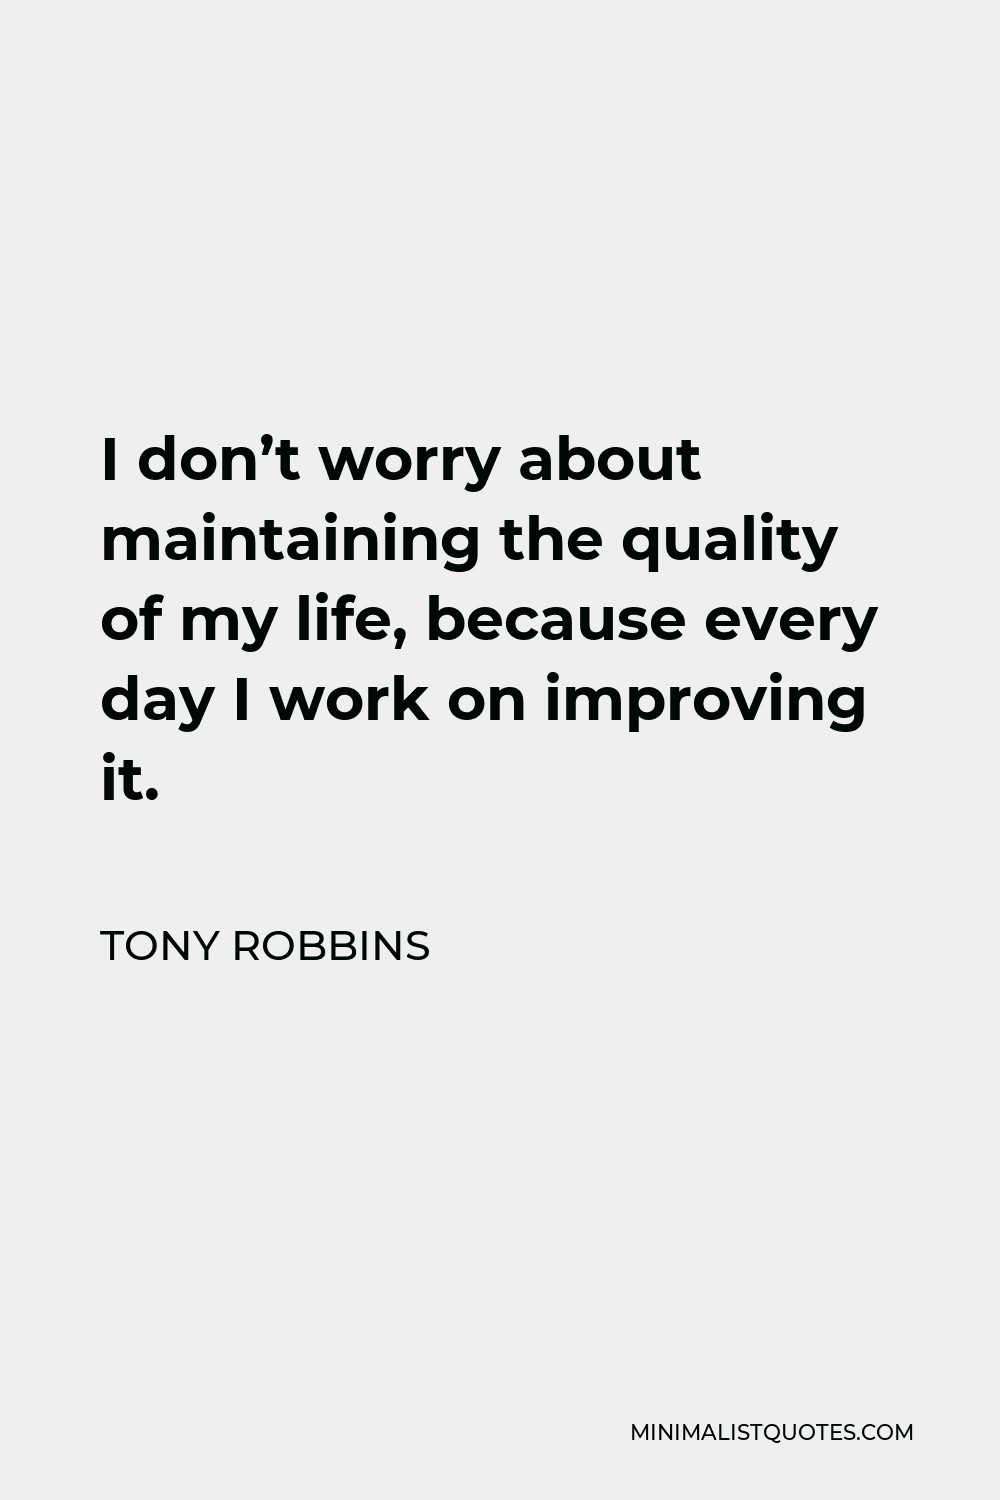 Tony Robbins Quote - I don’t worry about maintaining the quality of my life, because every day I work on improving it.